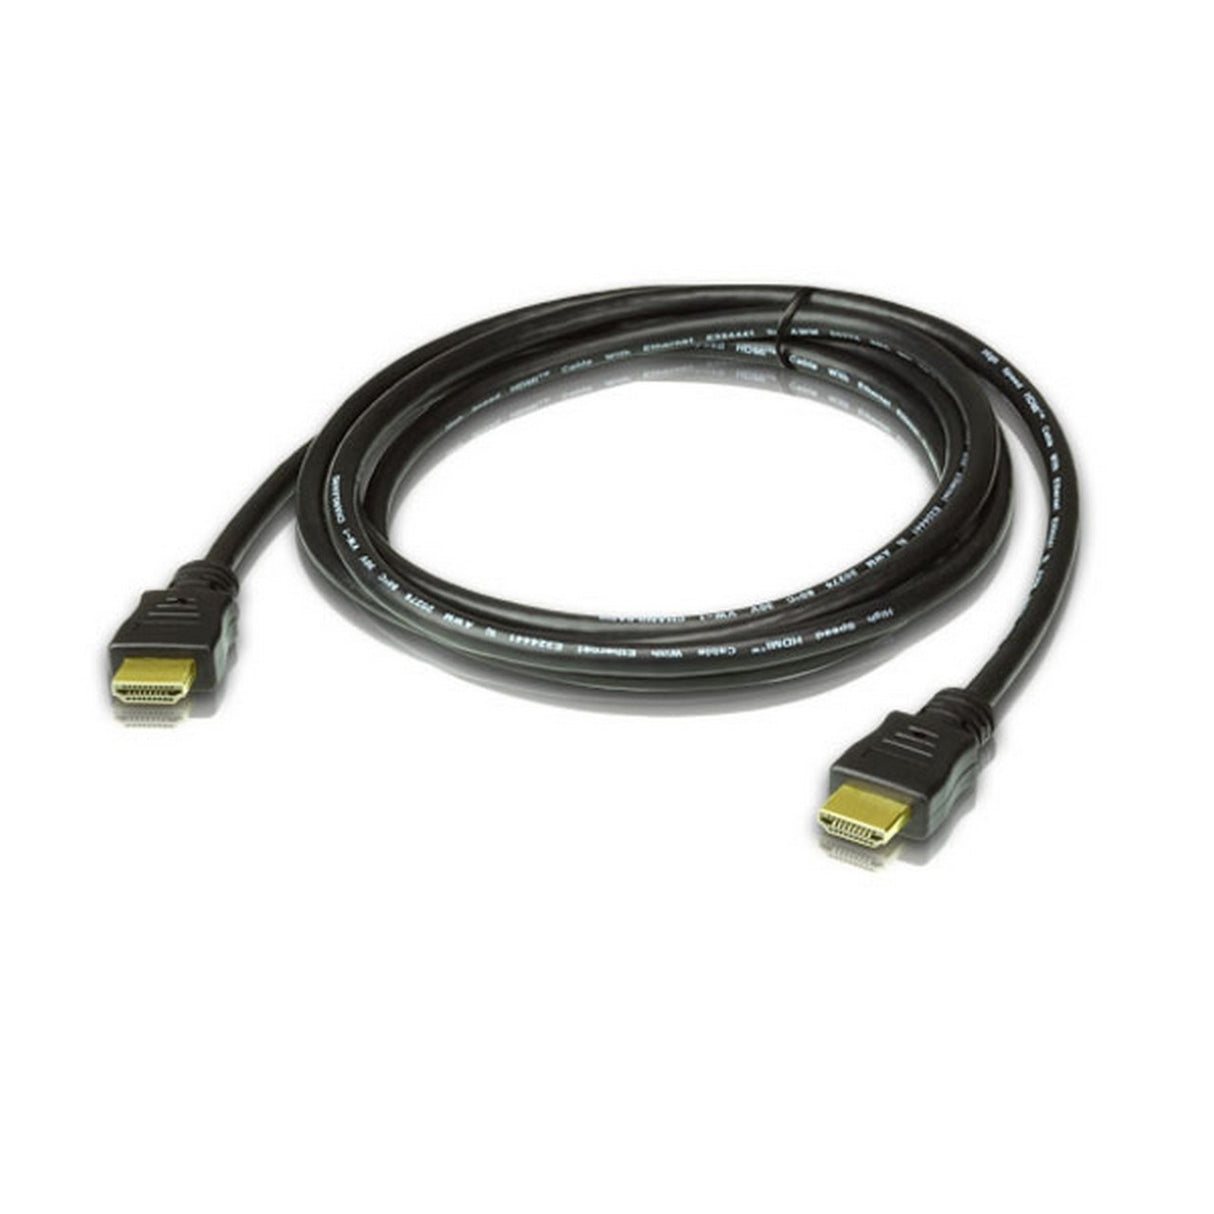 ATEN 2L-7D10H | 10 Meter HDMI Cable with Ethernet